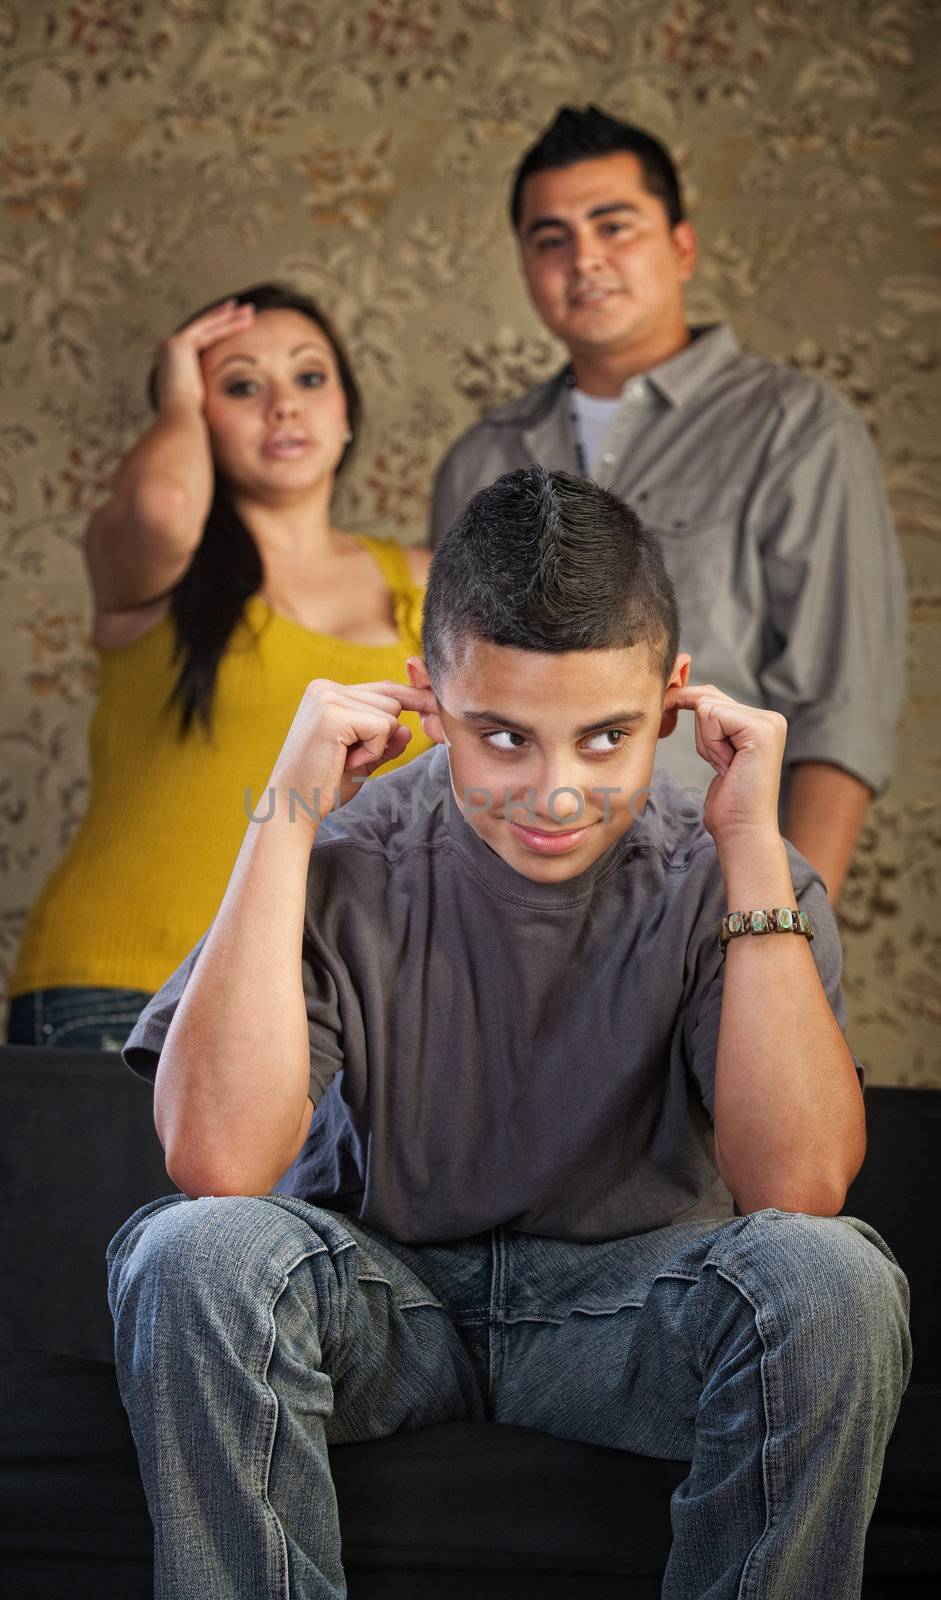 Frustrated parents and child with ears plugged